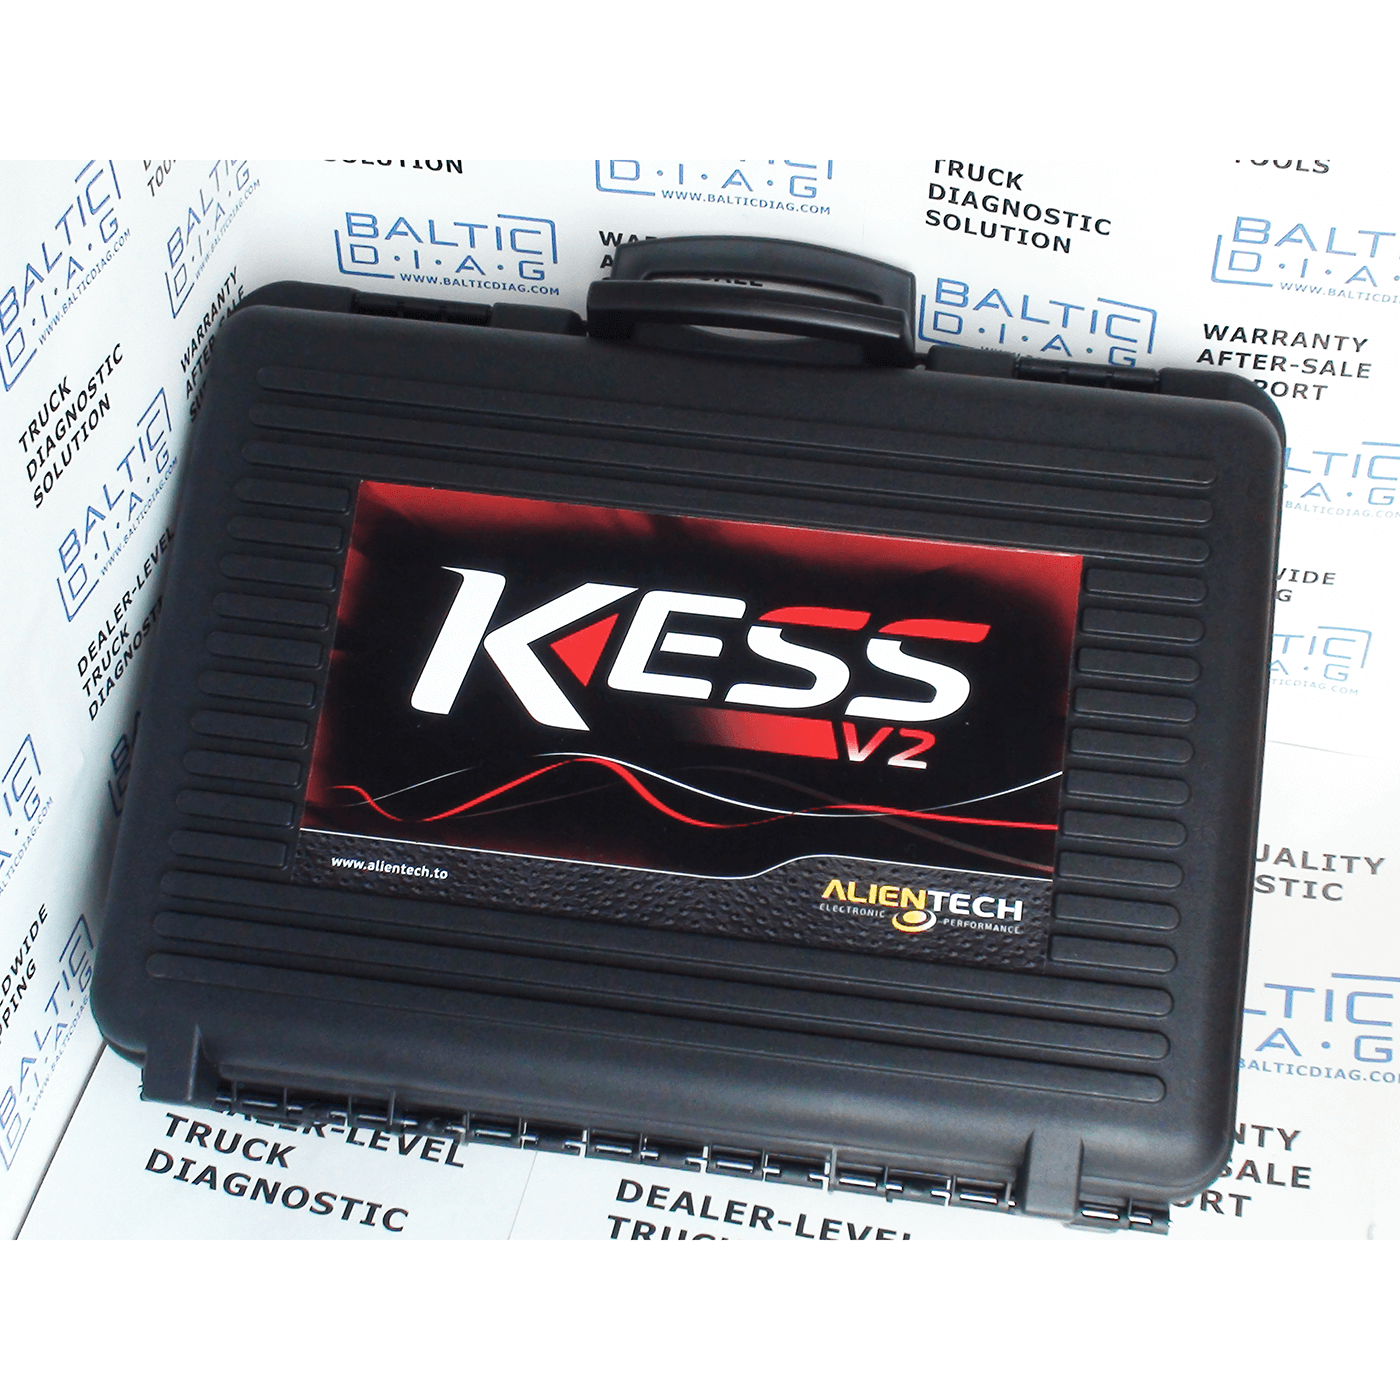 ALIENTECH KESS V2 MASTER With Truck OBD Protocol pack